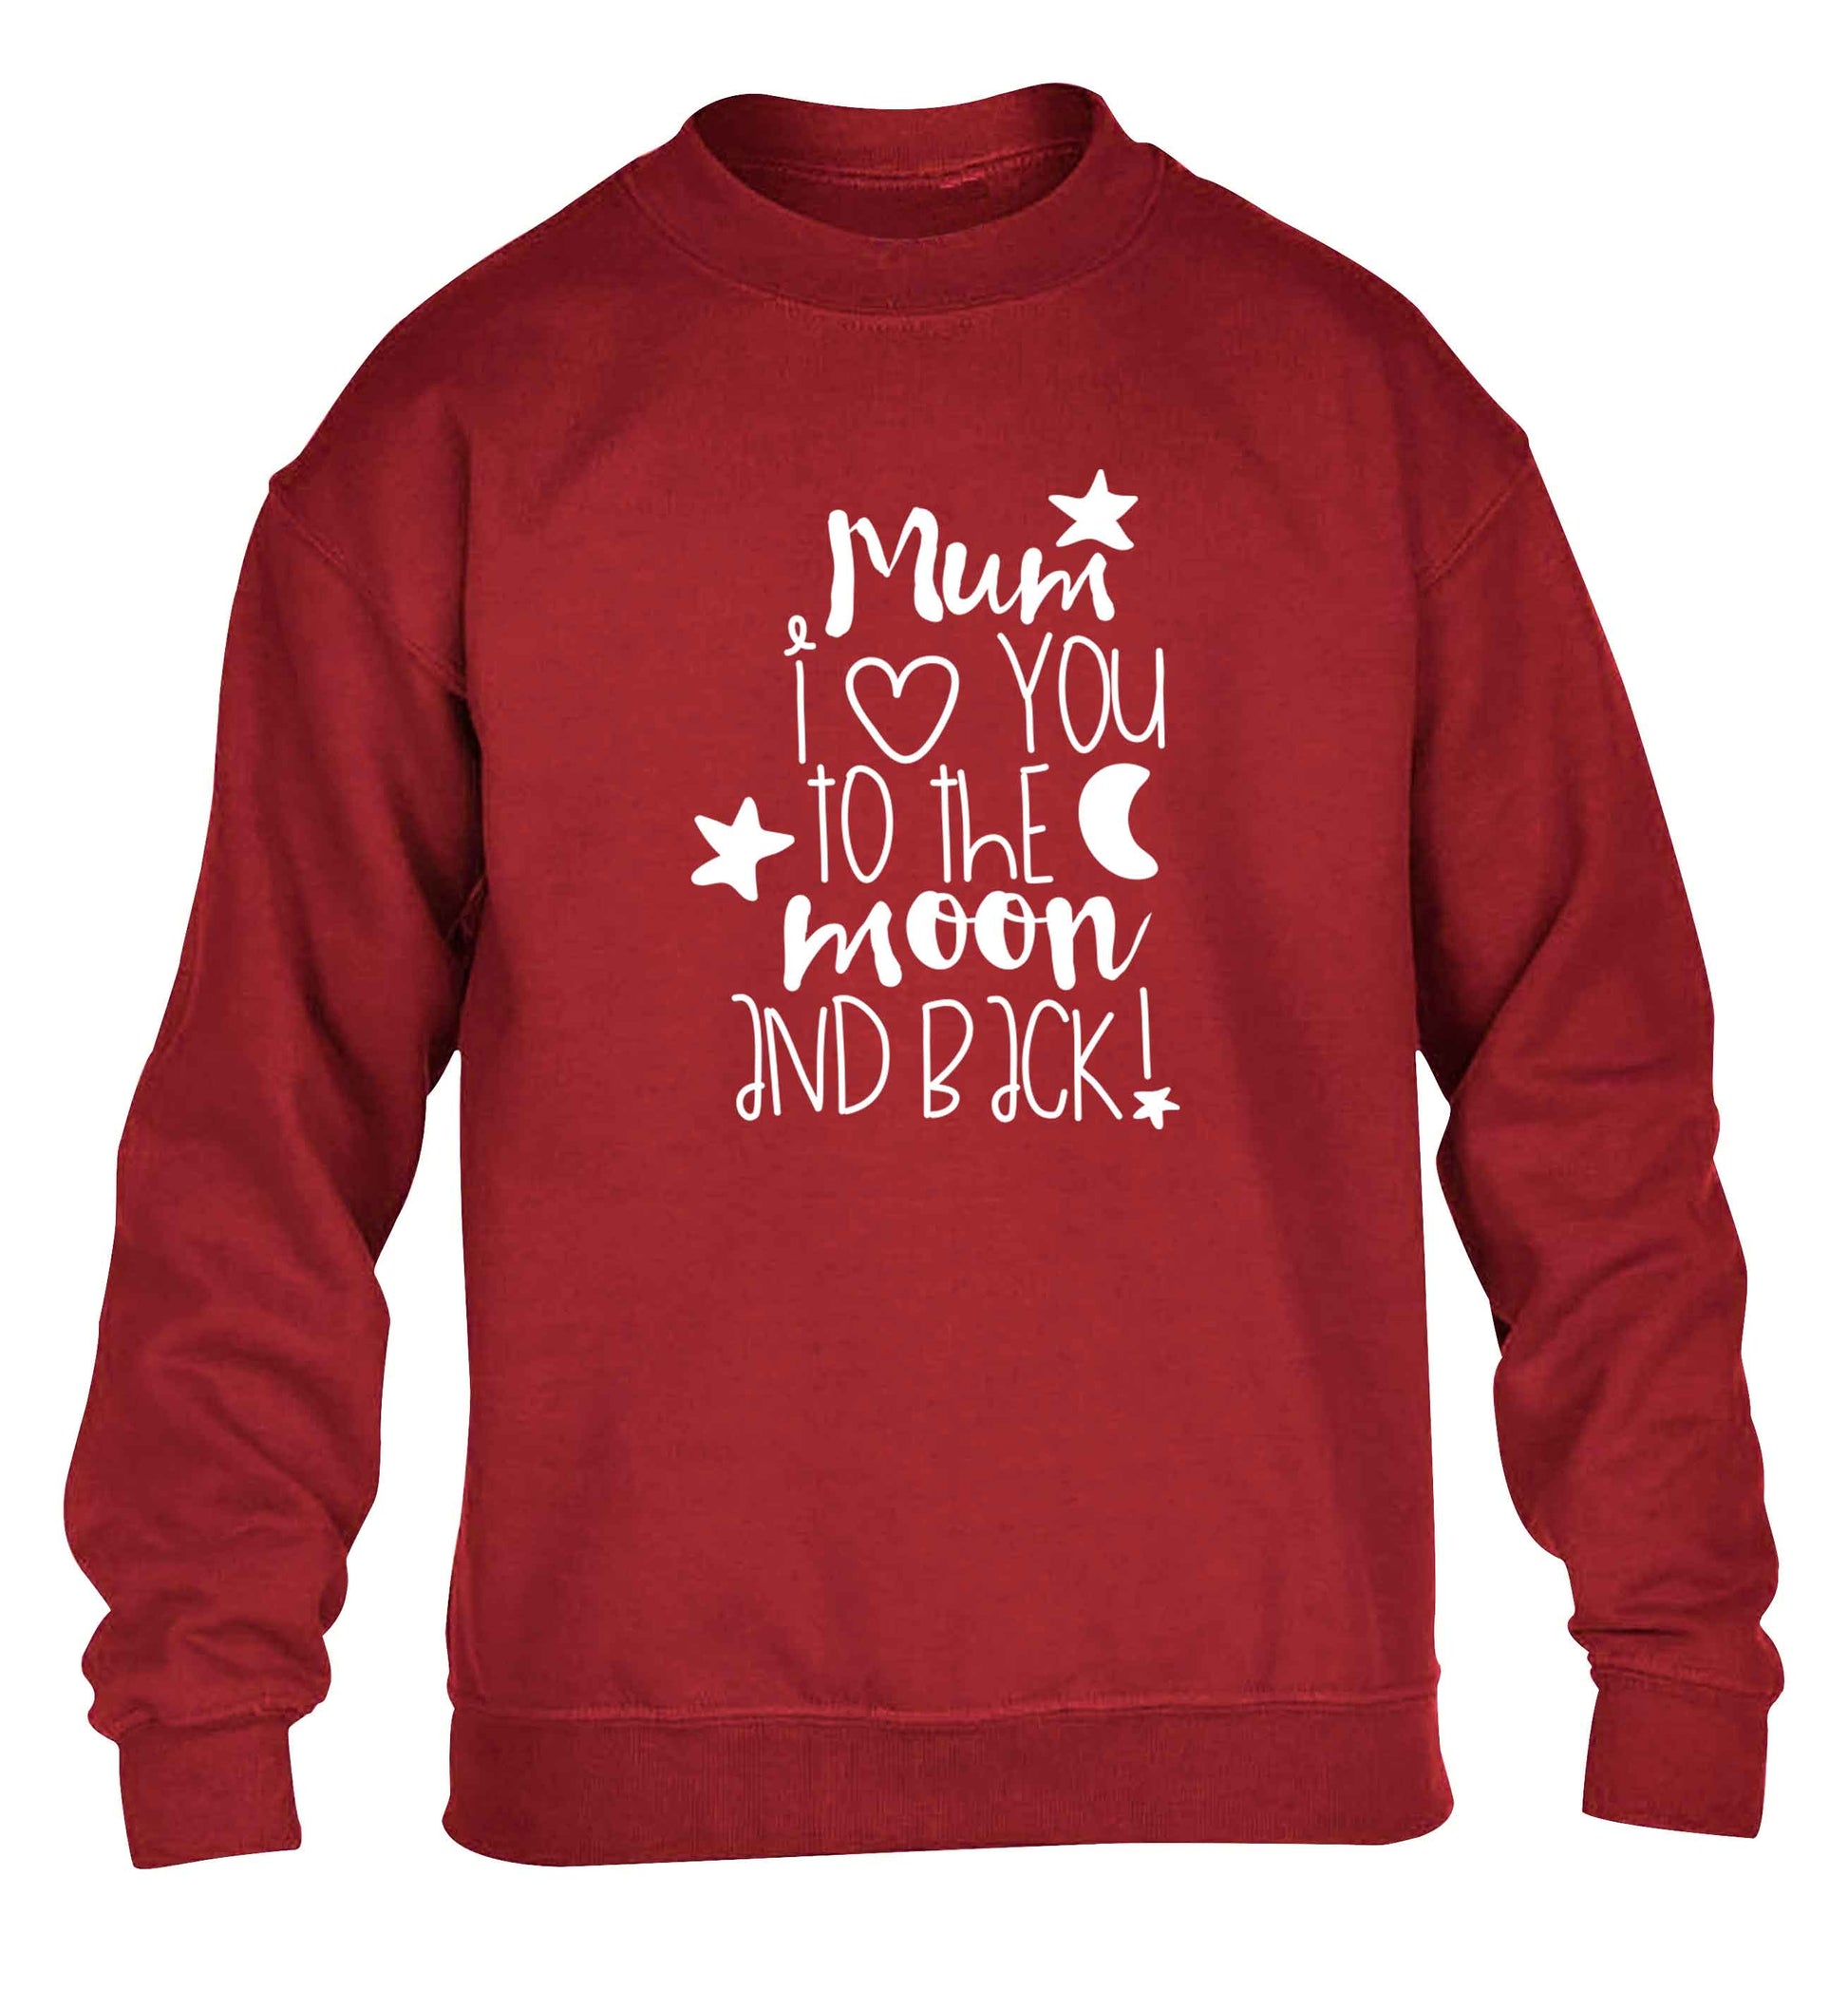 Mum I love you to the moon and back children's grey sweater 12-13 Years